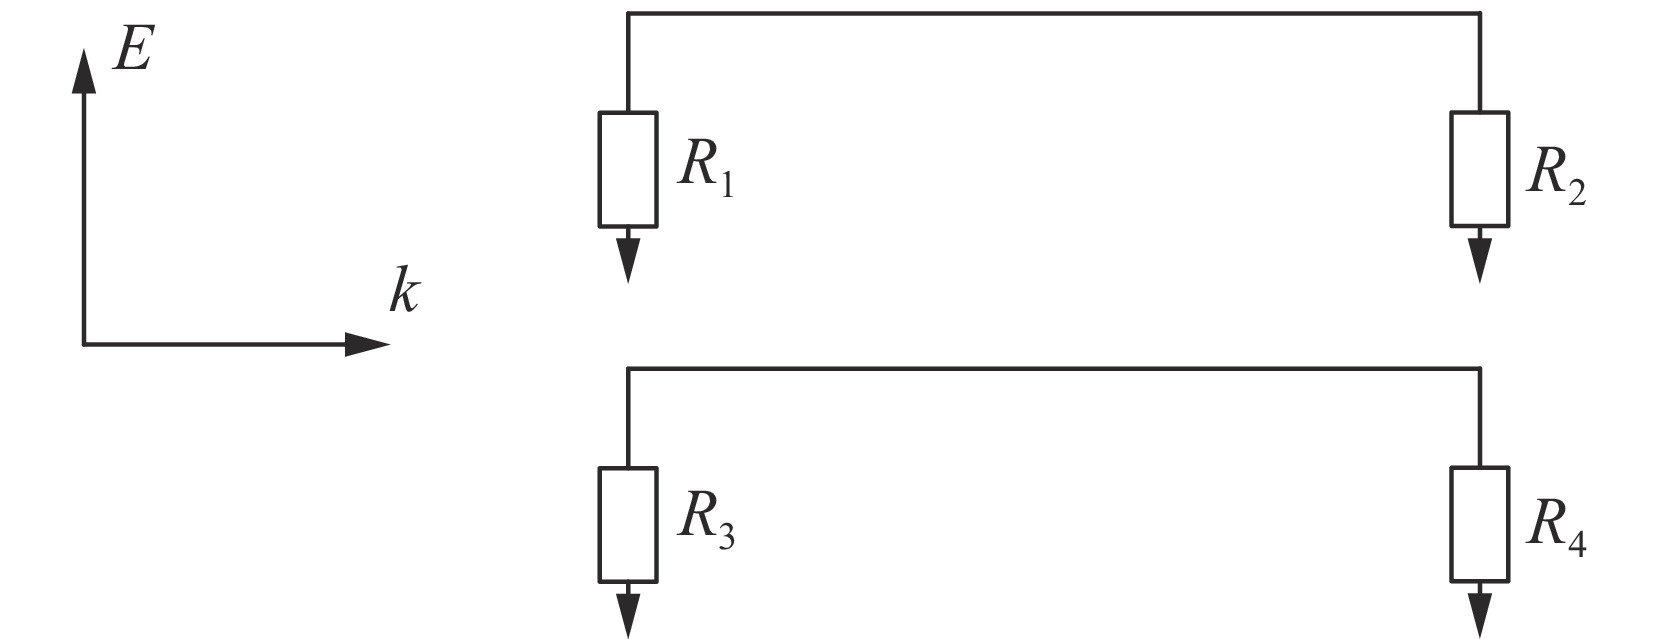 Schematic diagram of a double conductor transmission line irradiated by an ideal surface plane wave